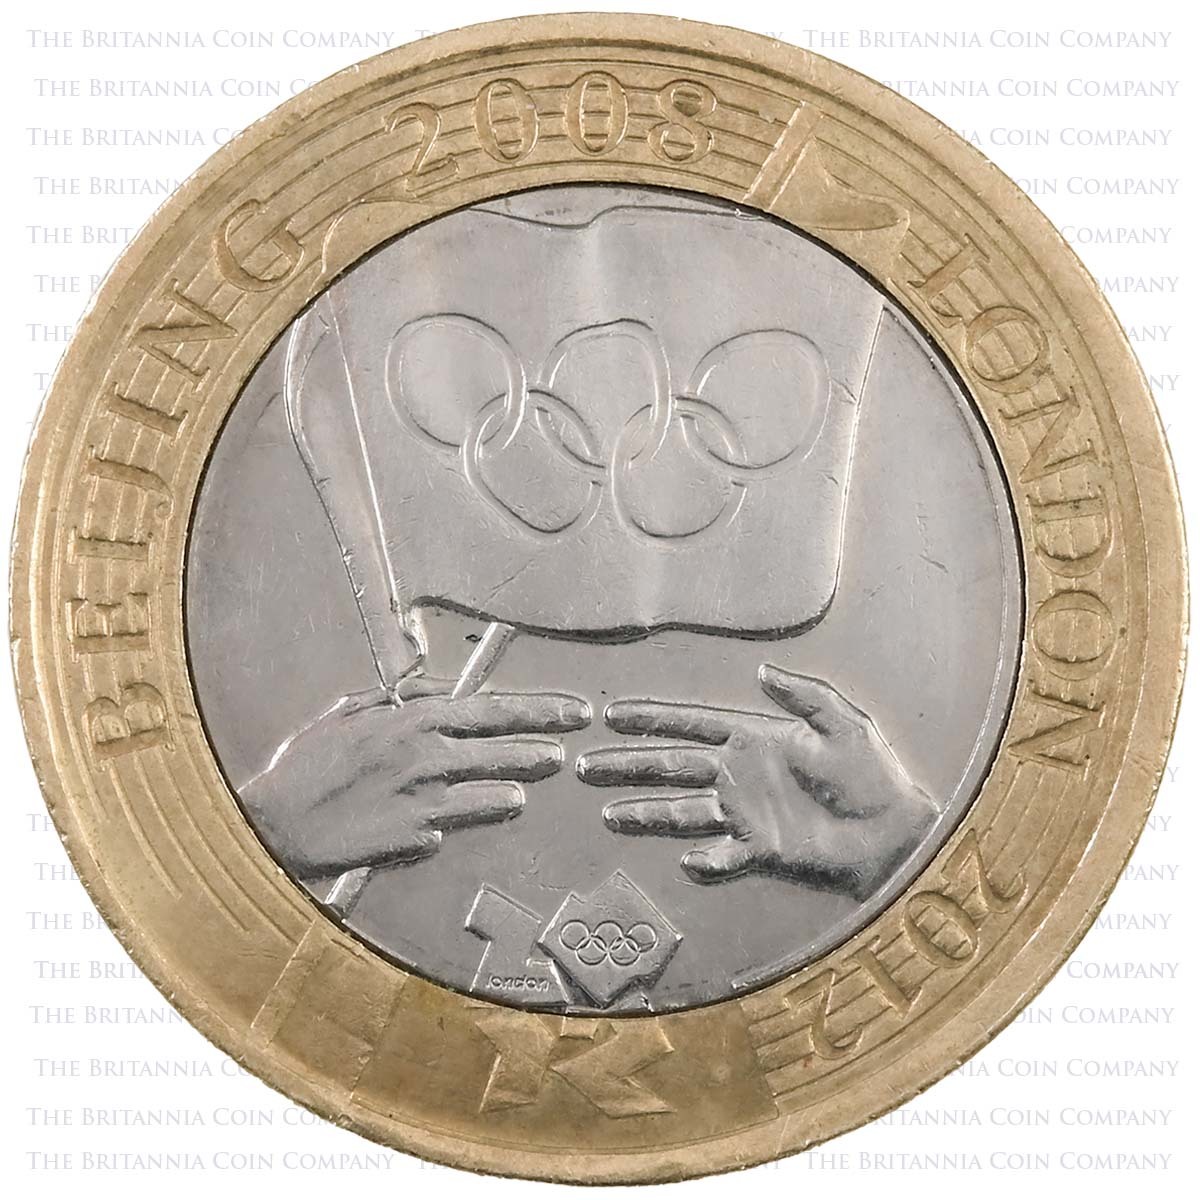 2008 Olympics Handover To London Ceremony Circulated Two Pound Coin Reverse